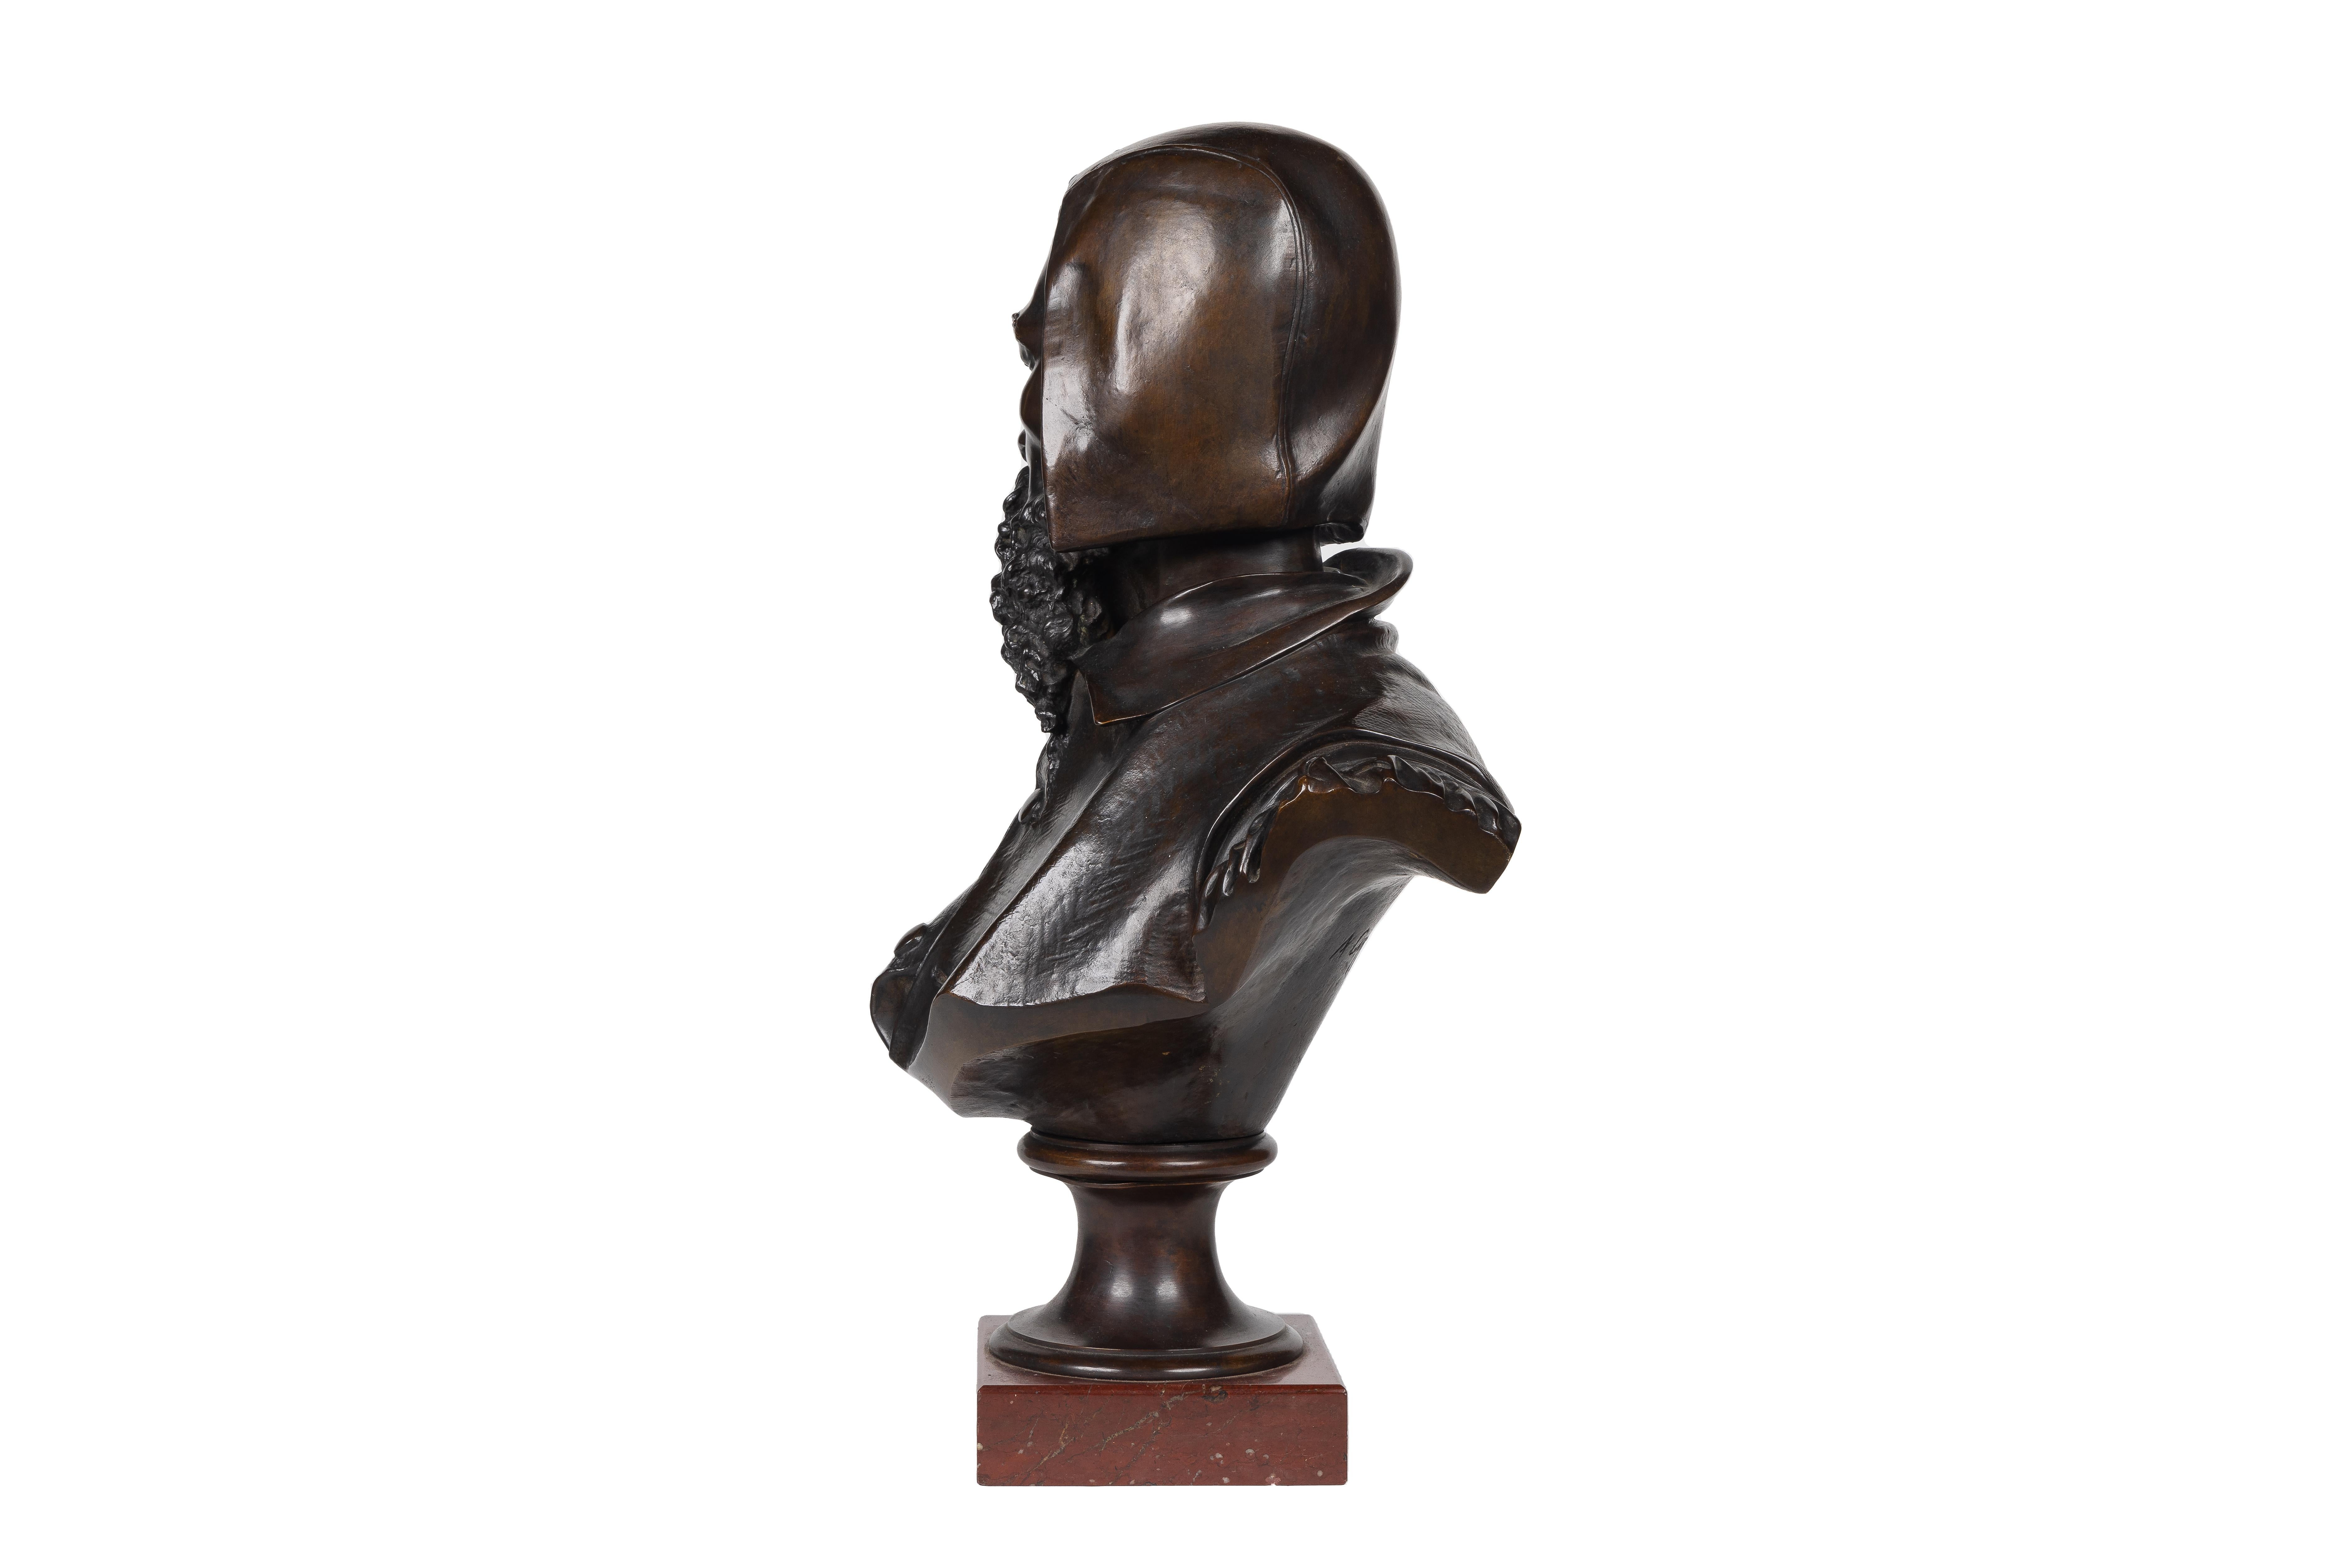 French Albert-Ernest Carrier-Belleuse, A Rare and Important Bronze Bust of Michelangelo For Sale